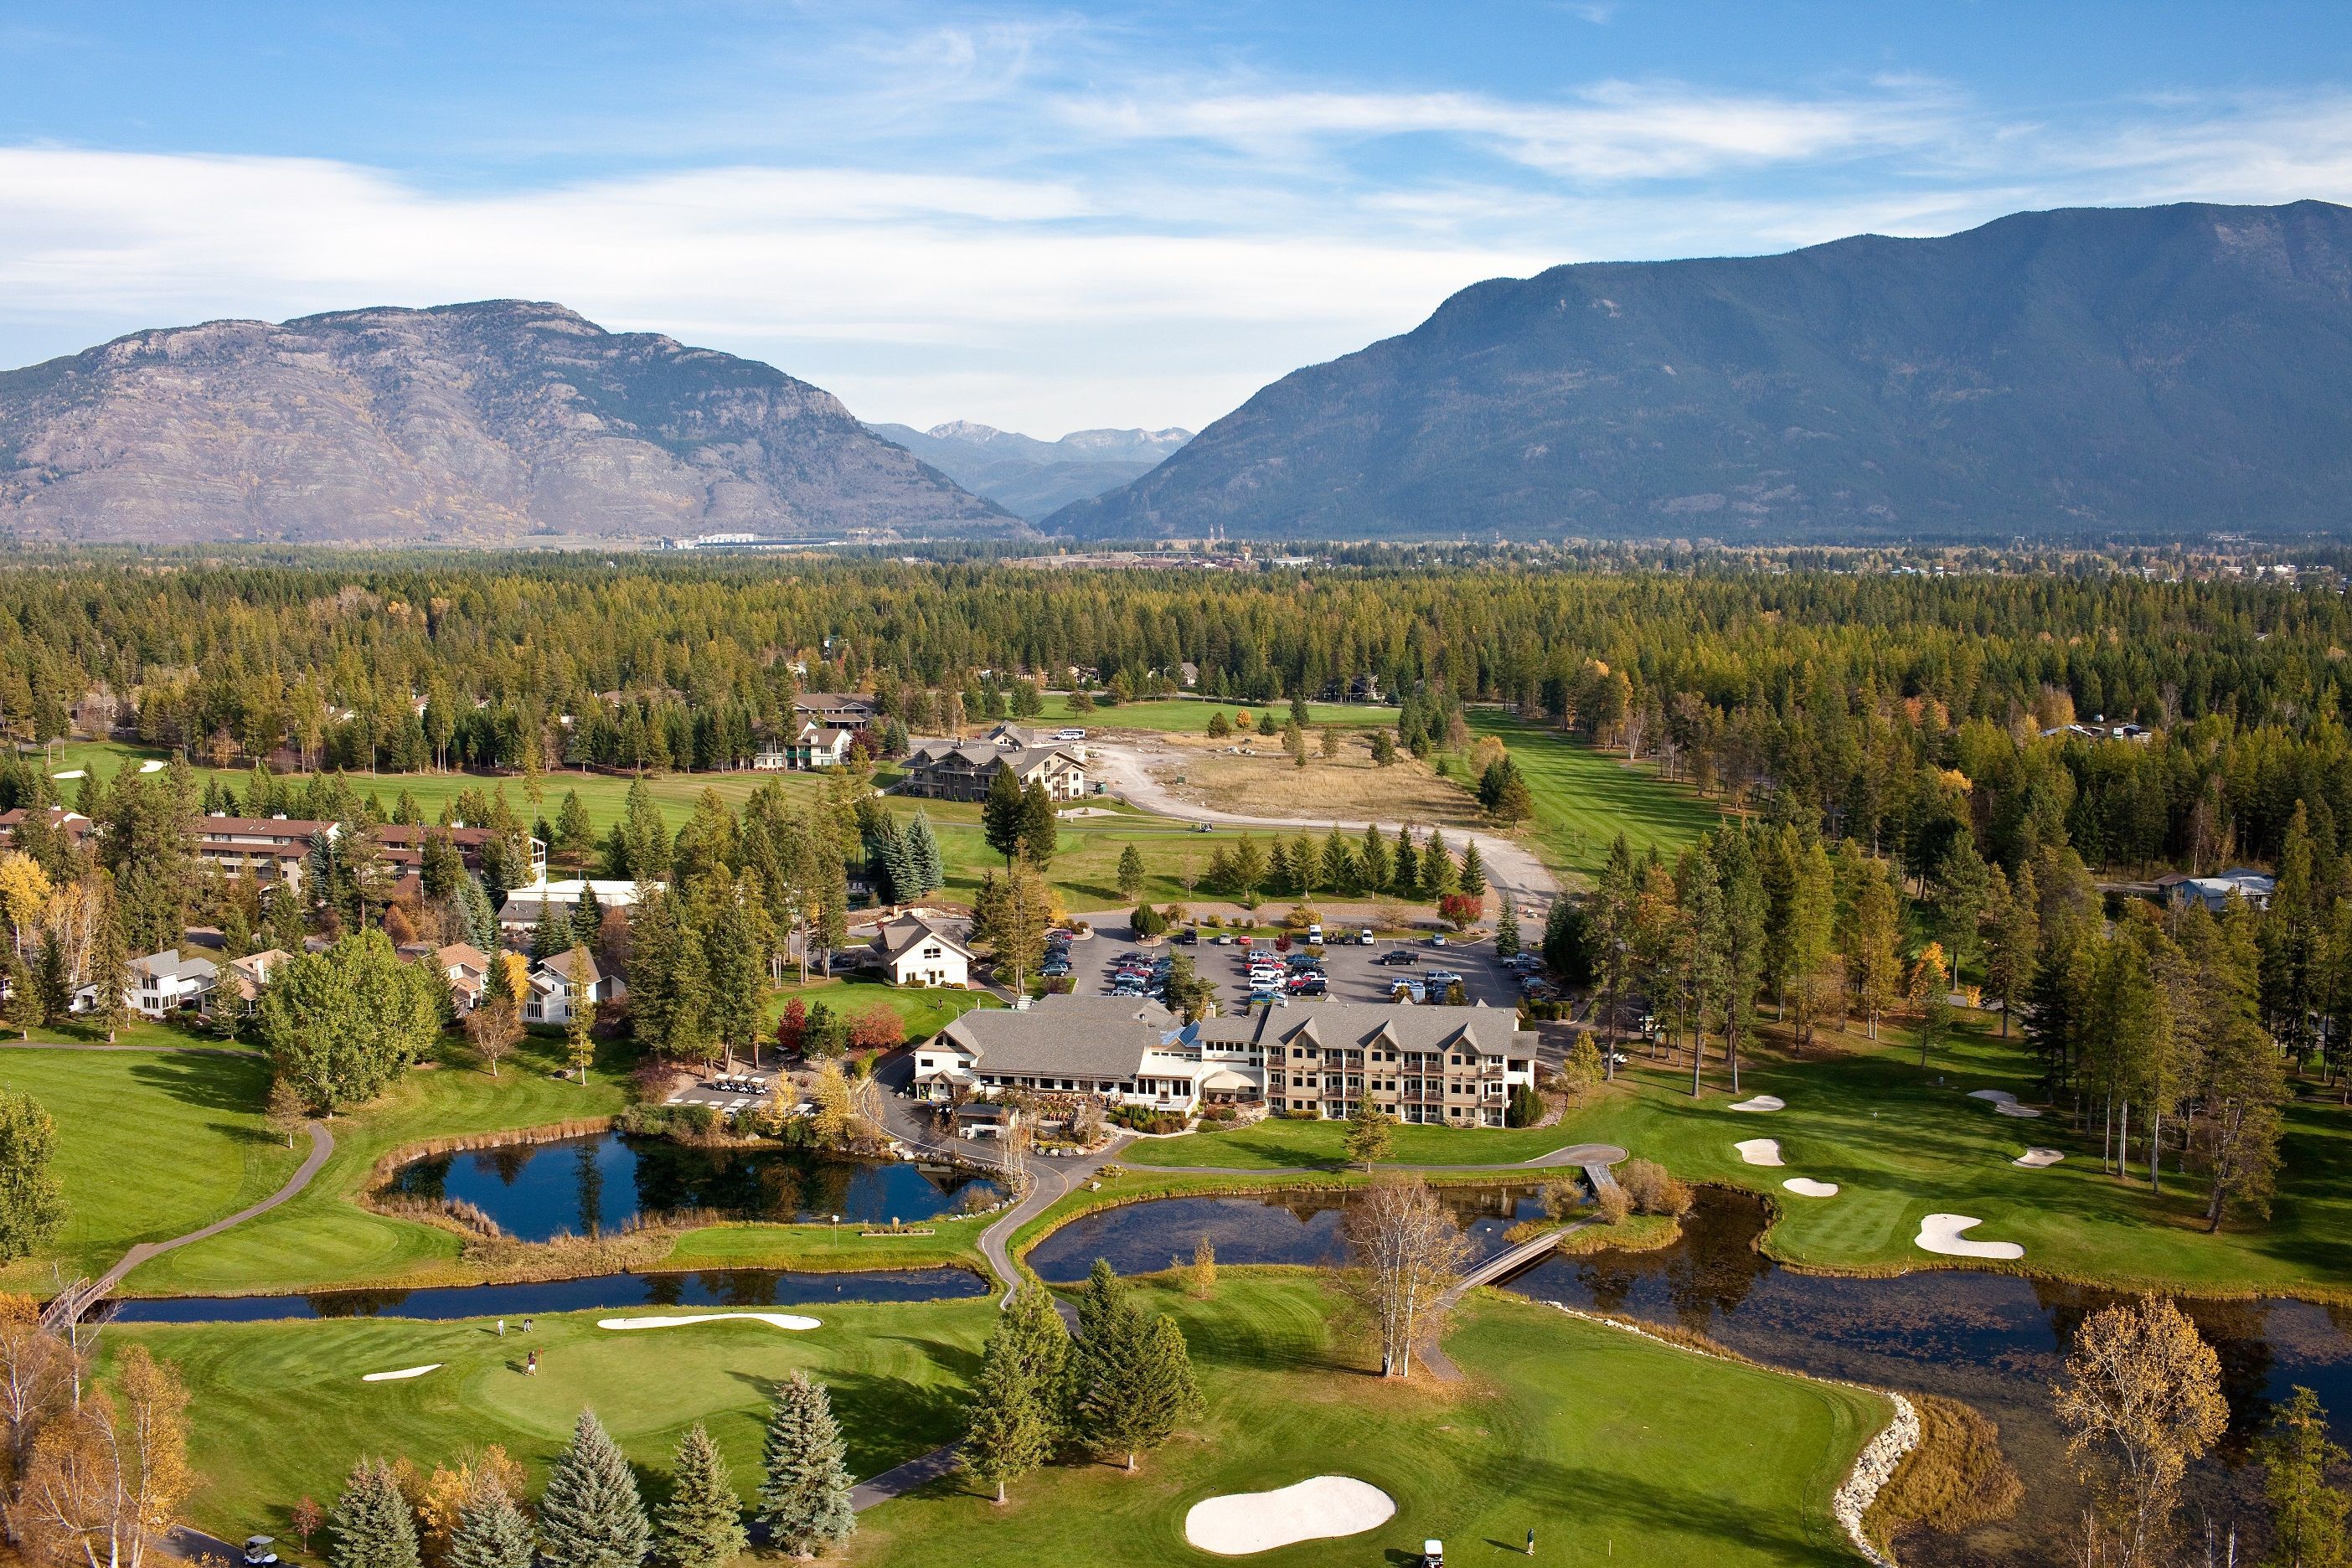 Meadow Lake Resort is located in Montana's Flathead Valley, between Glacier National Park and Whitefish Mountain.